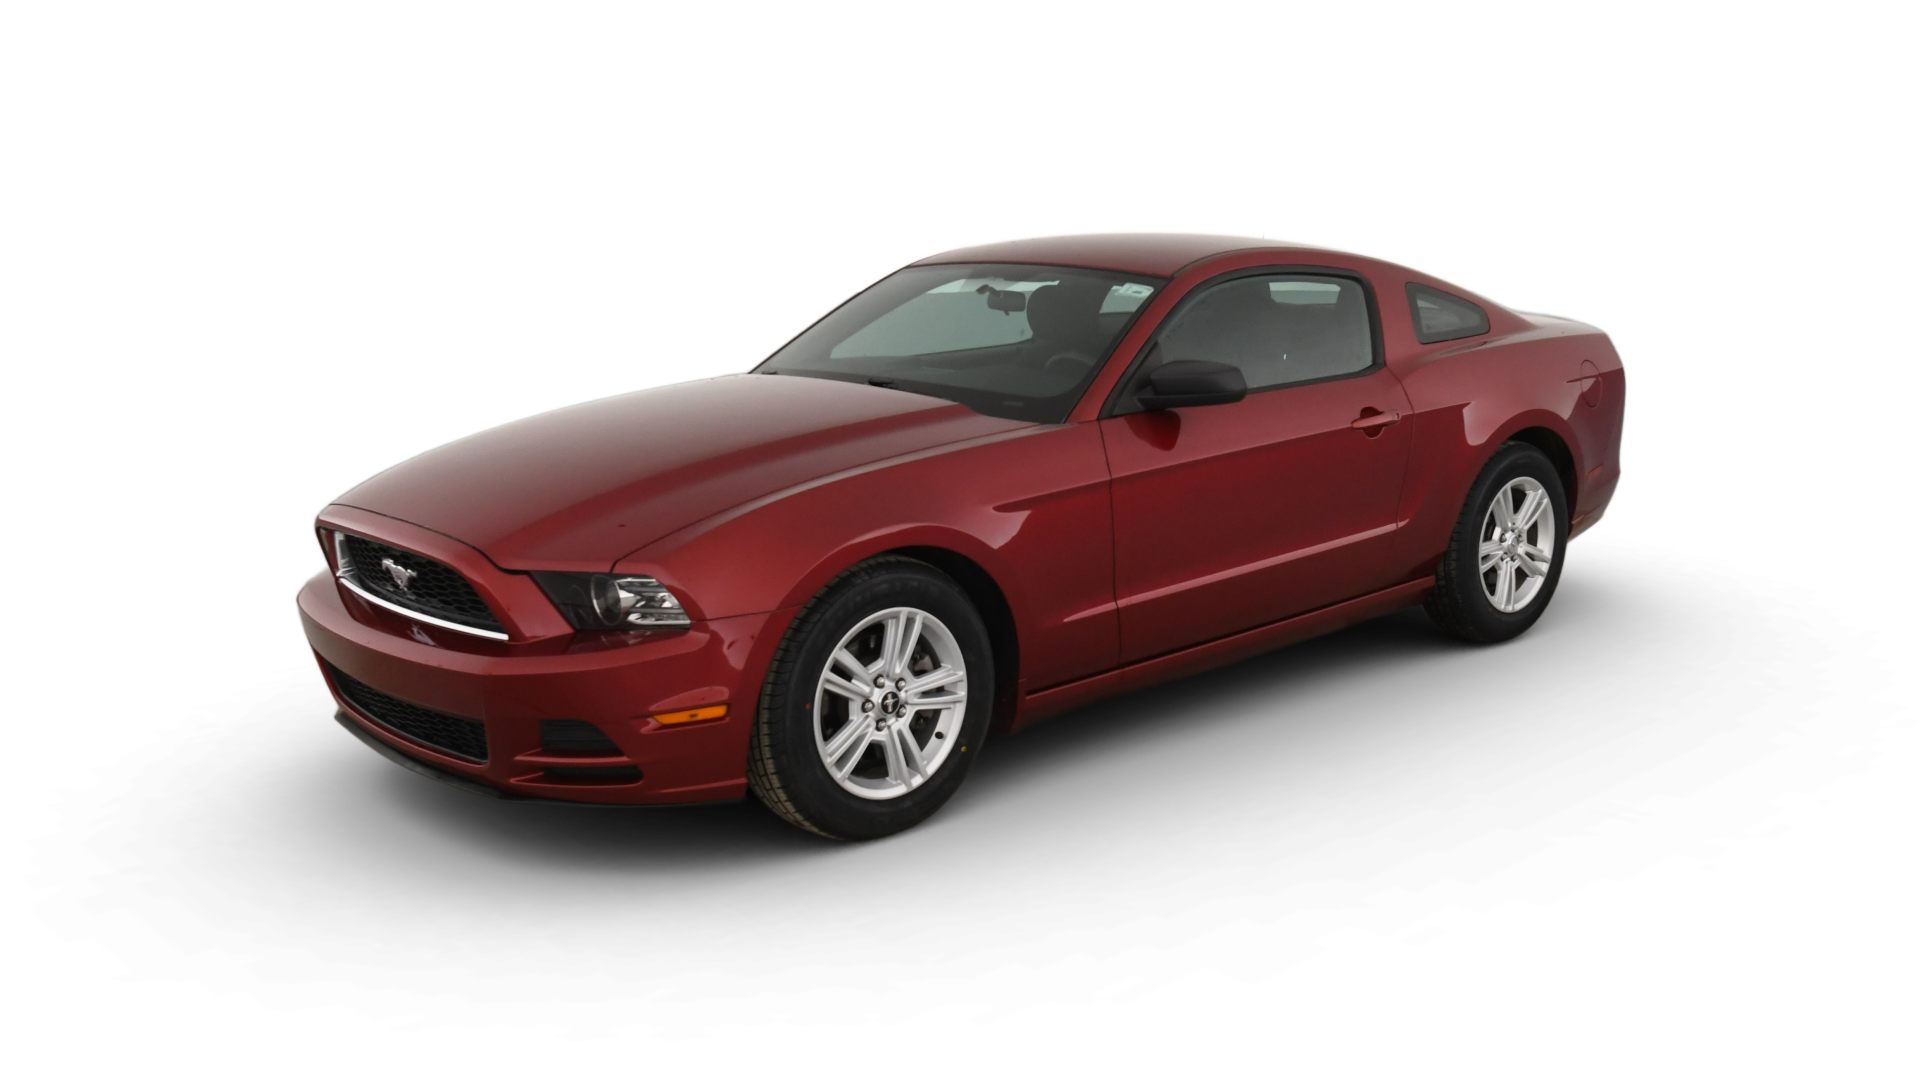 Used 2014 Ford Mustang For Sale Online | Carvana